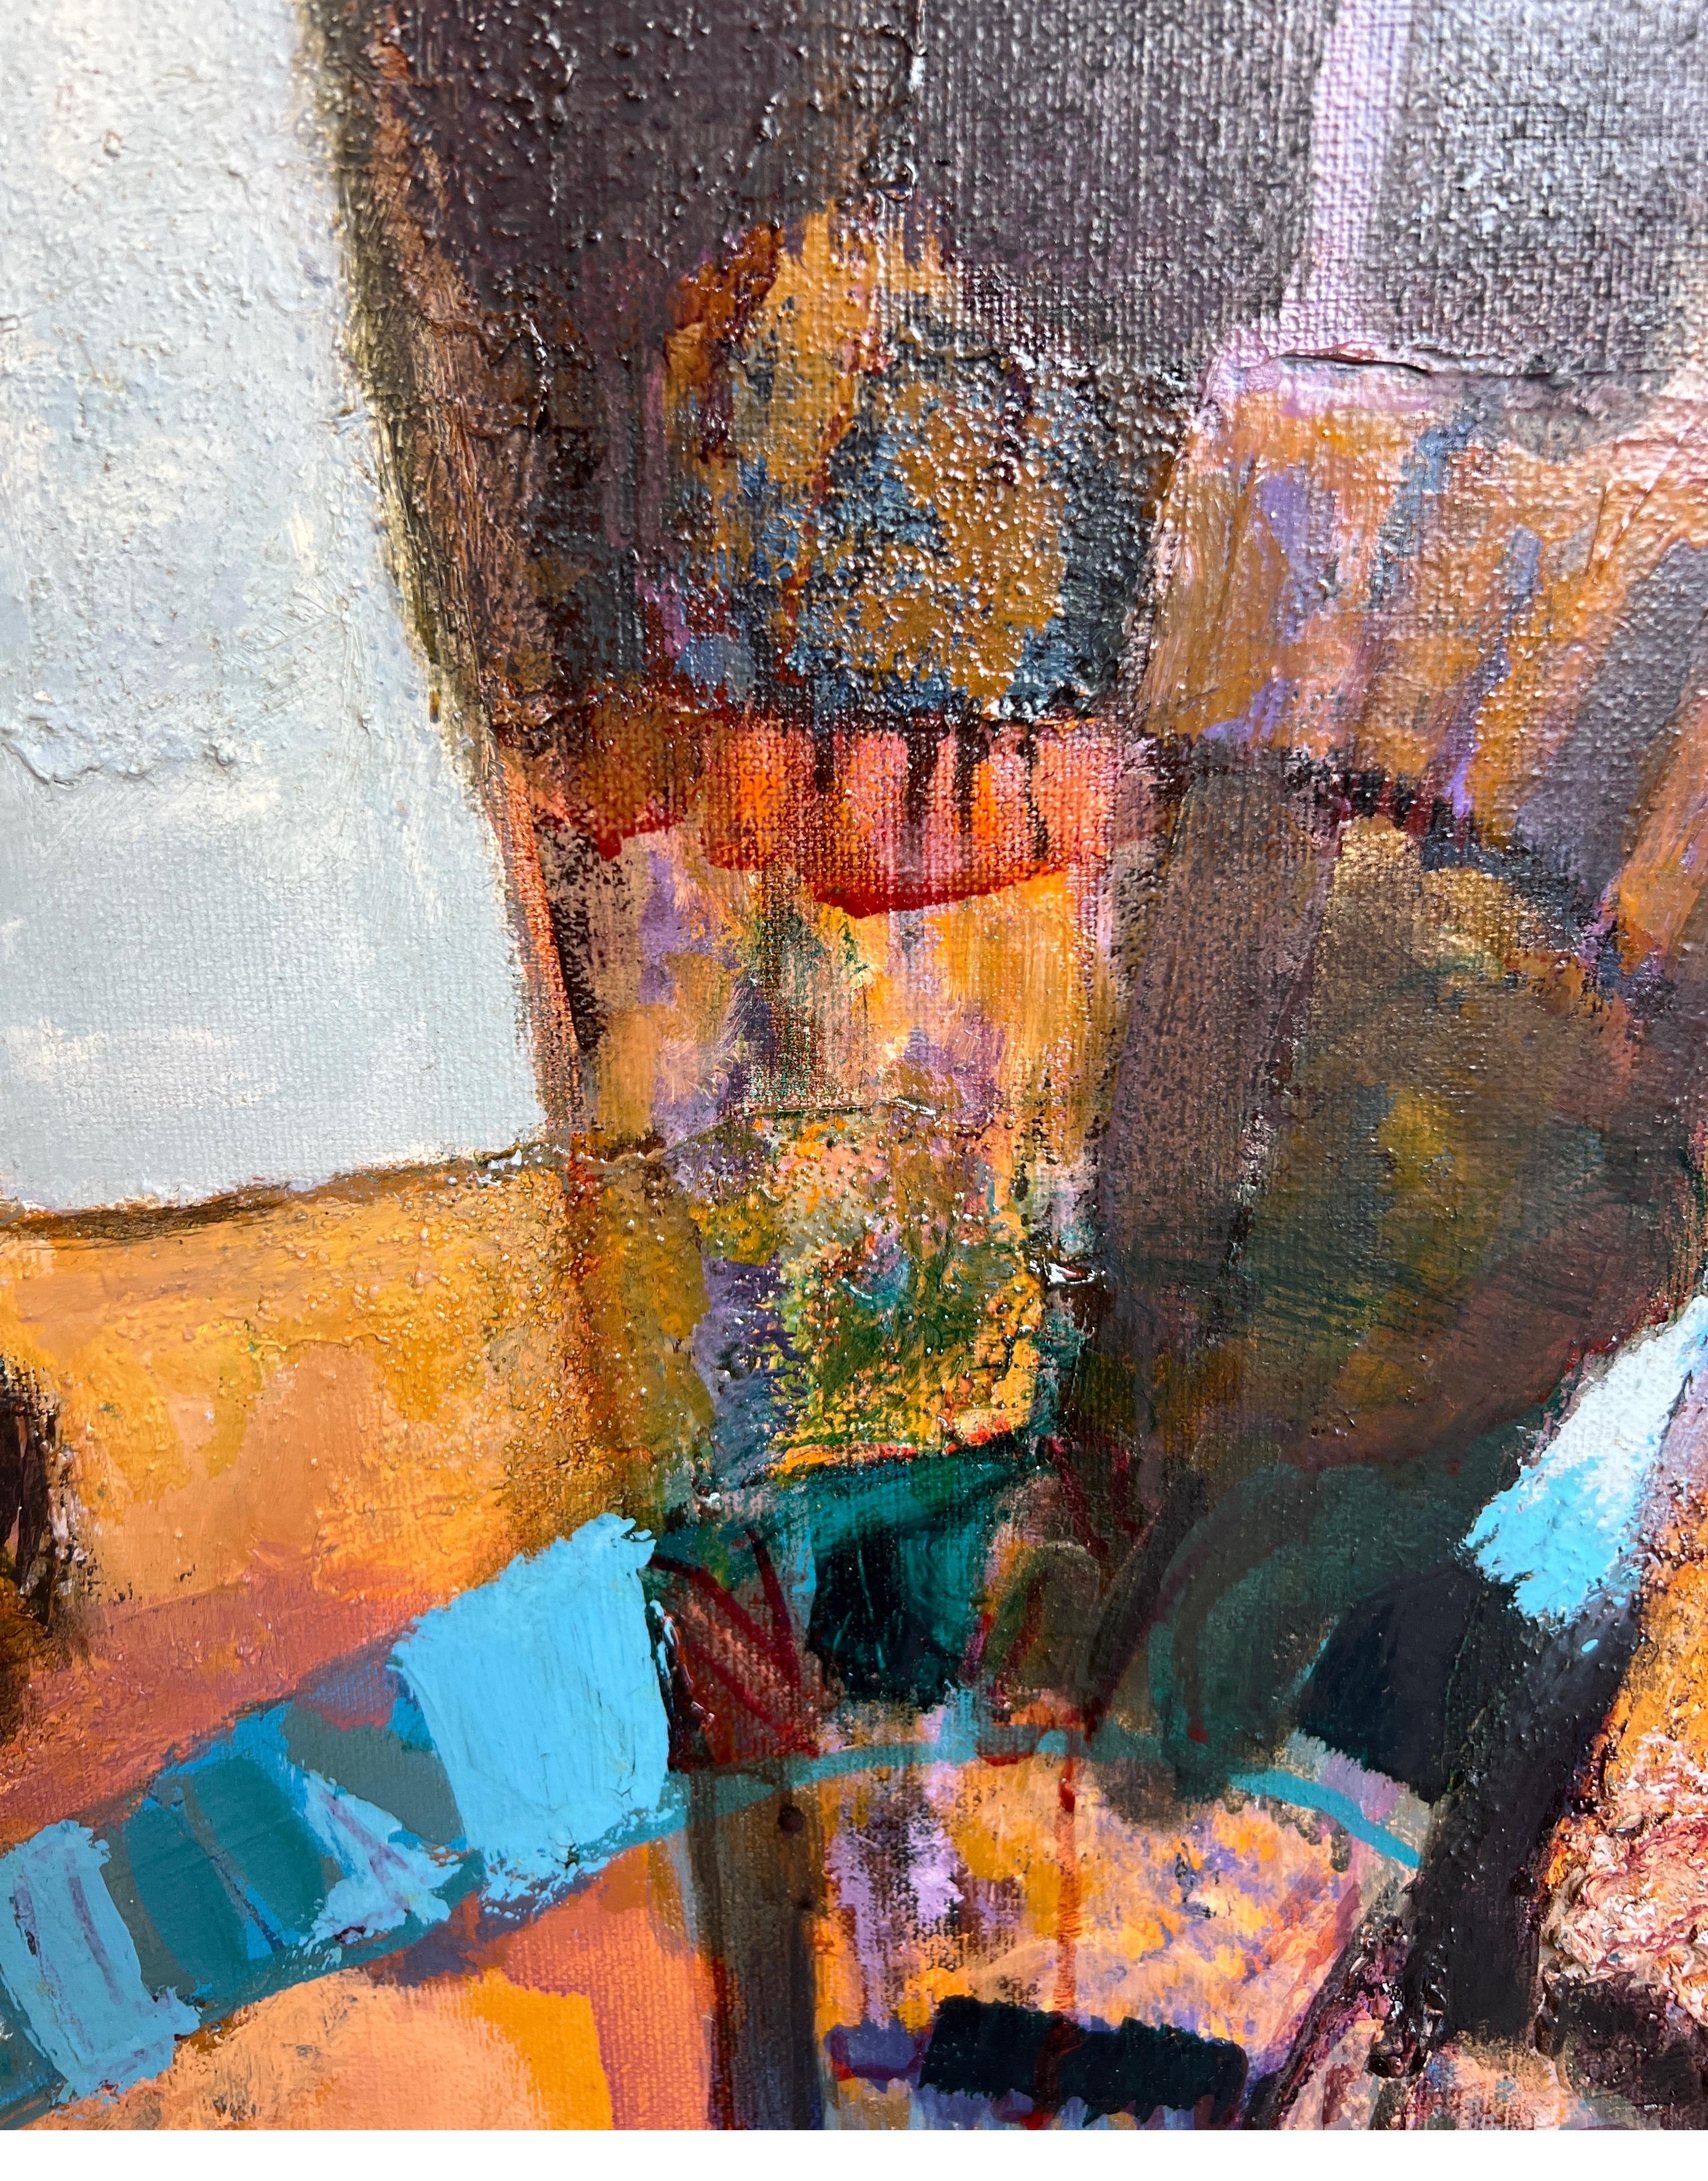 Modern abstract painting by Houston, TX artist Margaret Nobler. The work features colorful layers of yellow, orange, and blue tones set against a white background. Currently unframed, but options are available. 

Artist Biography: Margaret Nobler